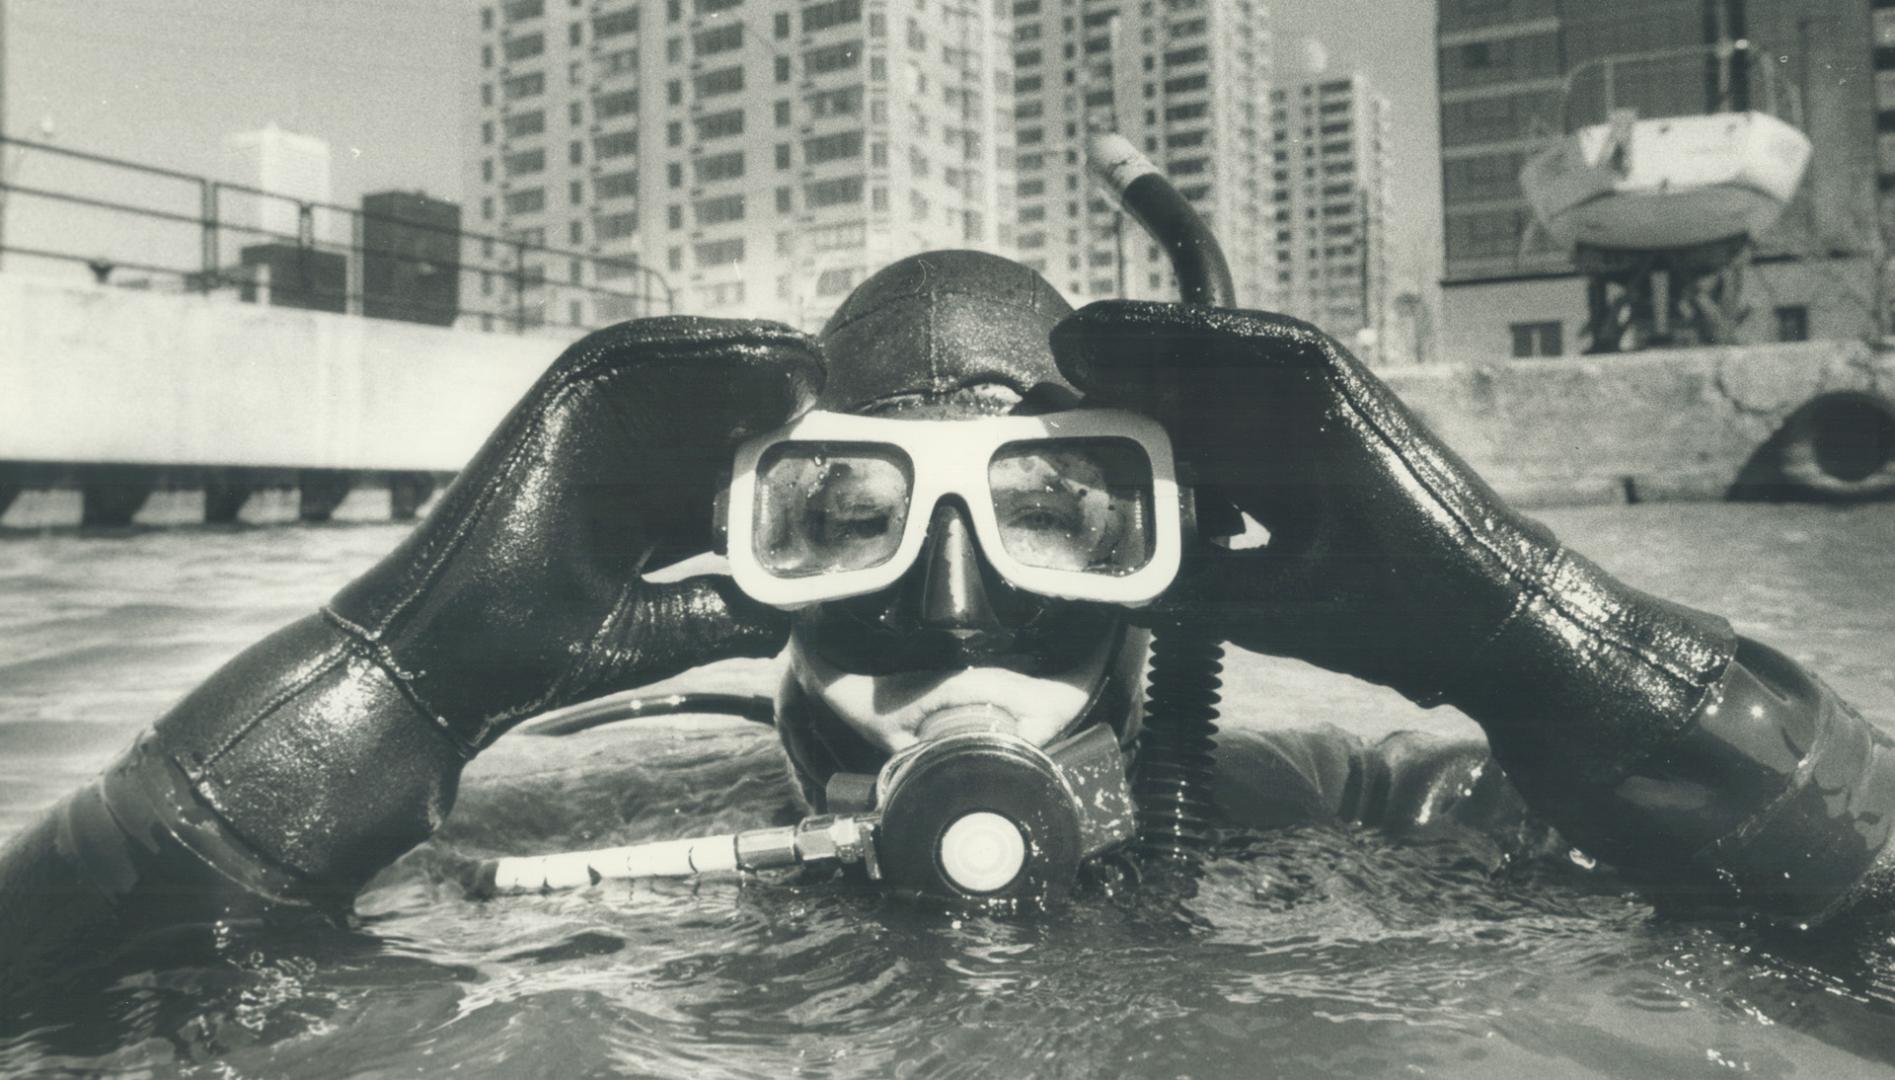 Harbourfront horror? No, just a student diver